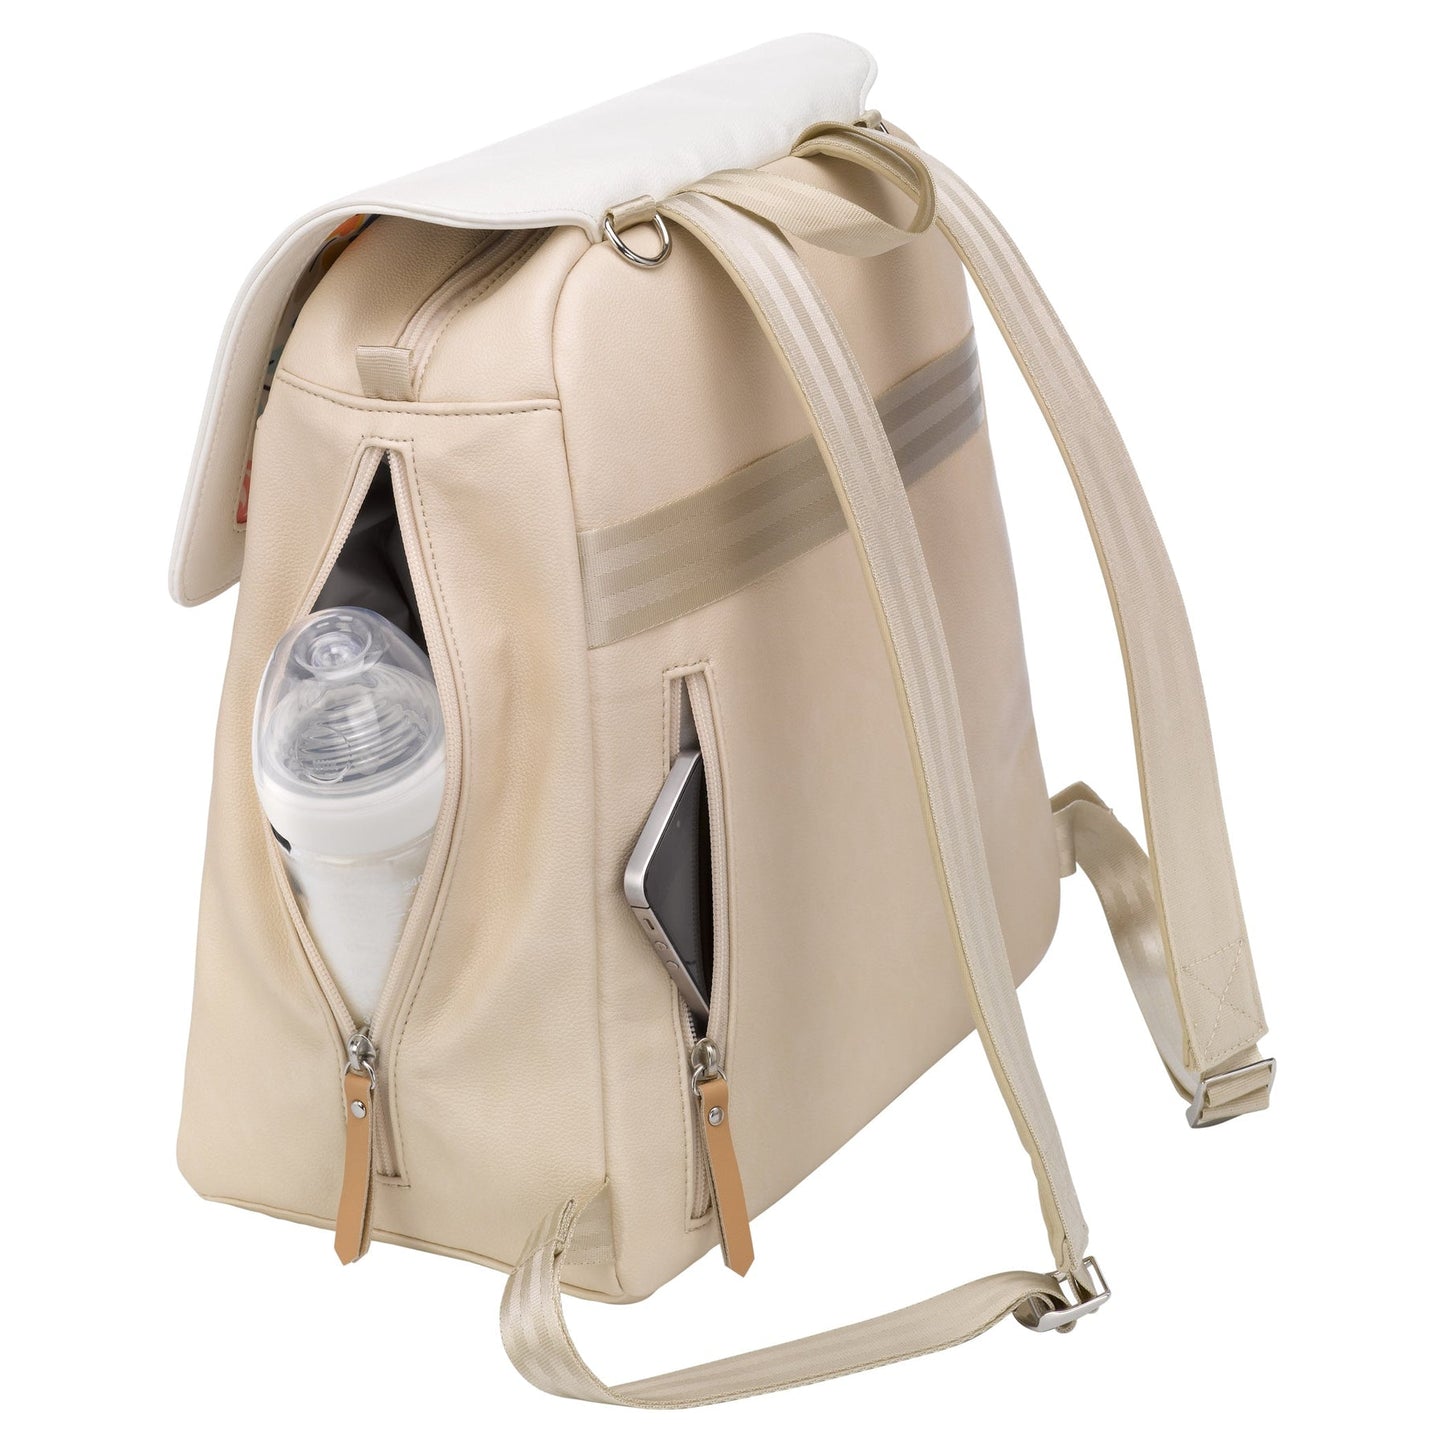 META BACKPACK IN TOASTED MARSHMALLOW